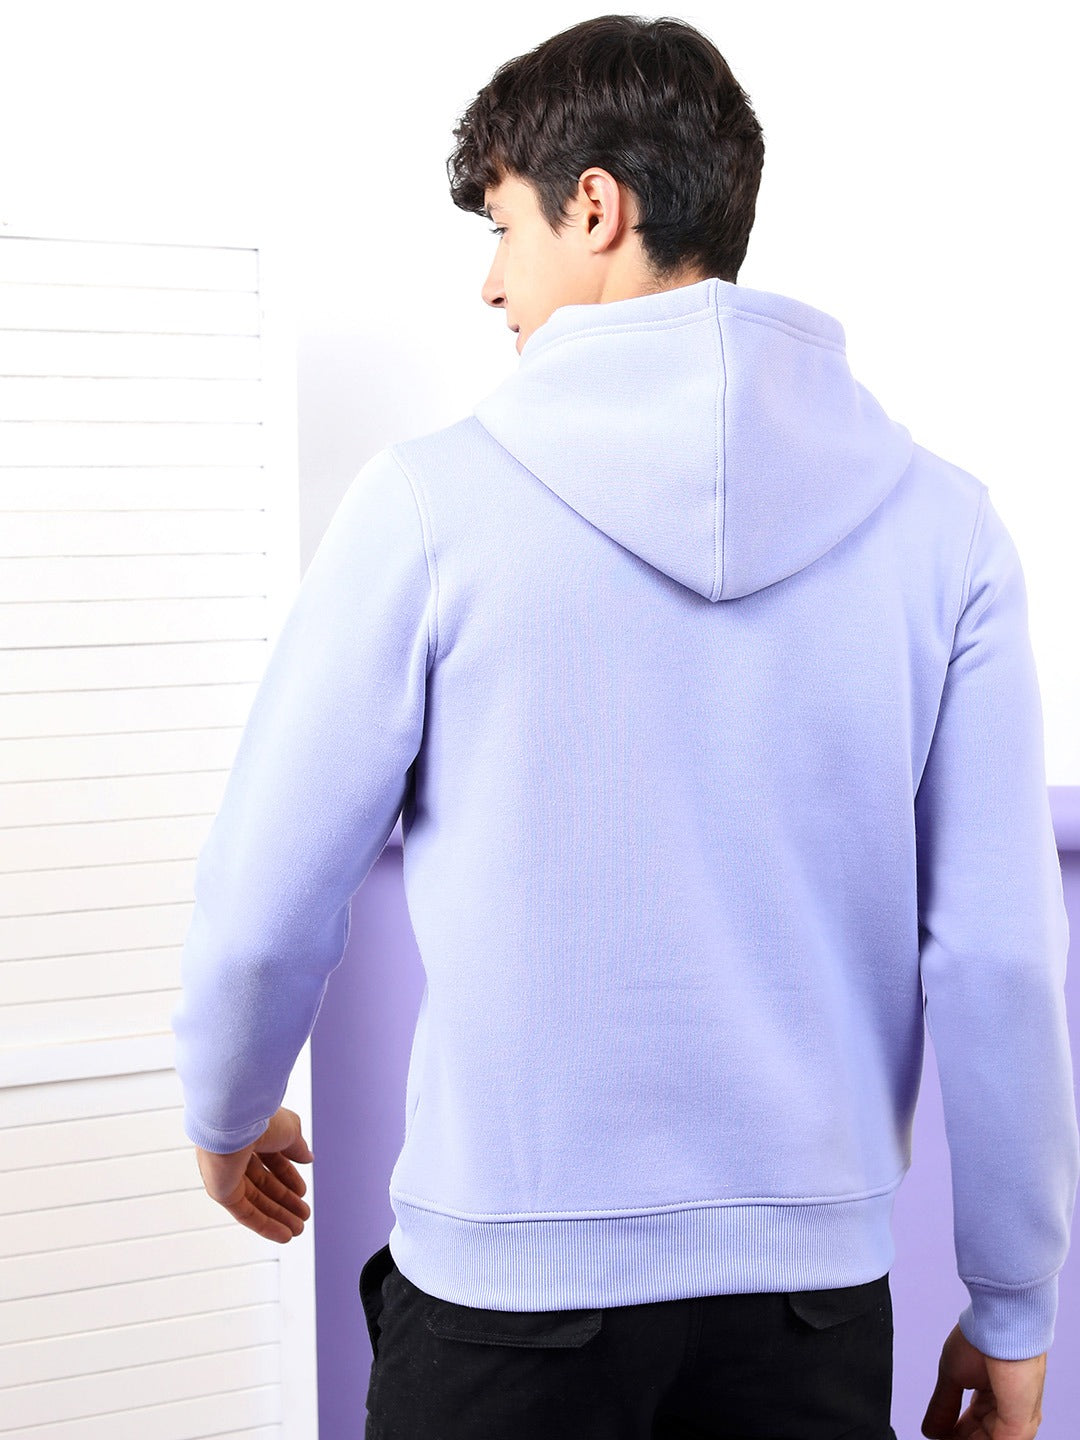 Stylish Men and Women (Unisex) Full Sleeves Cotton Hoodie Purple Color